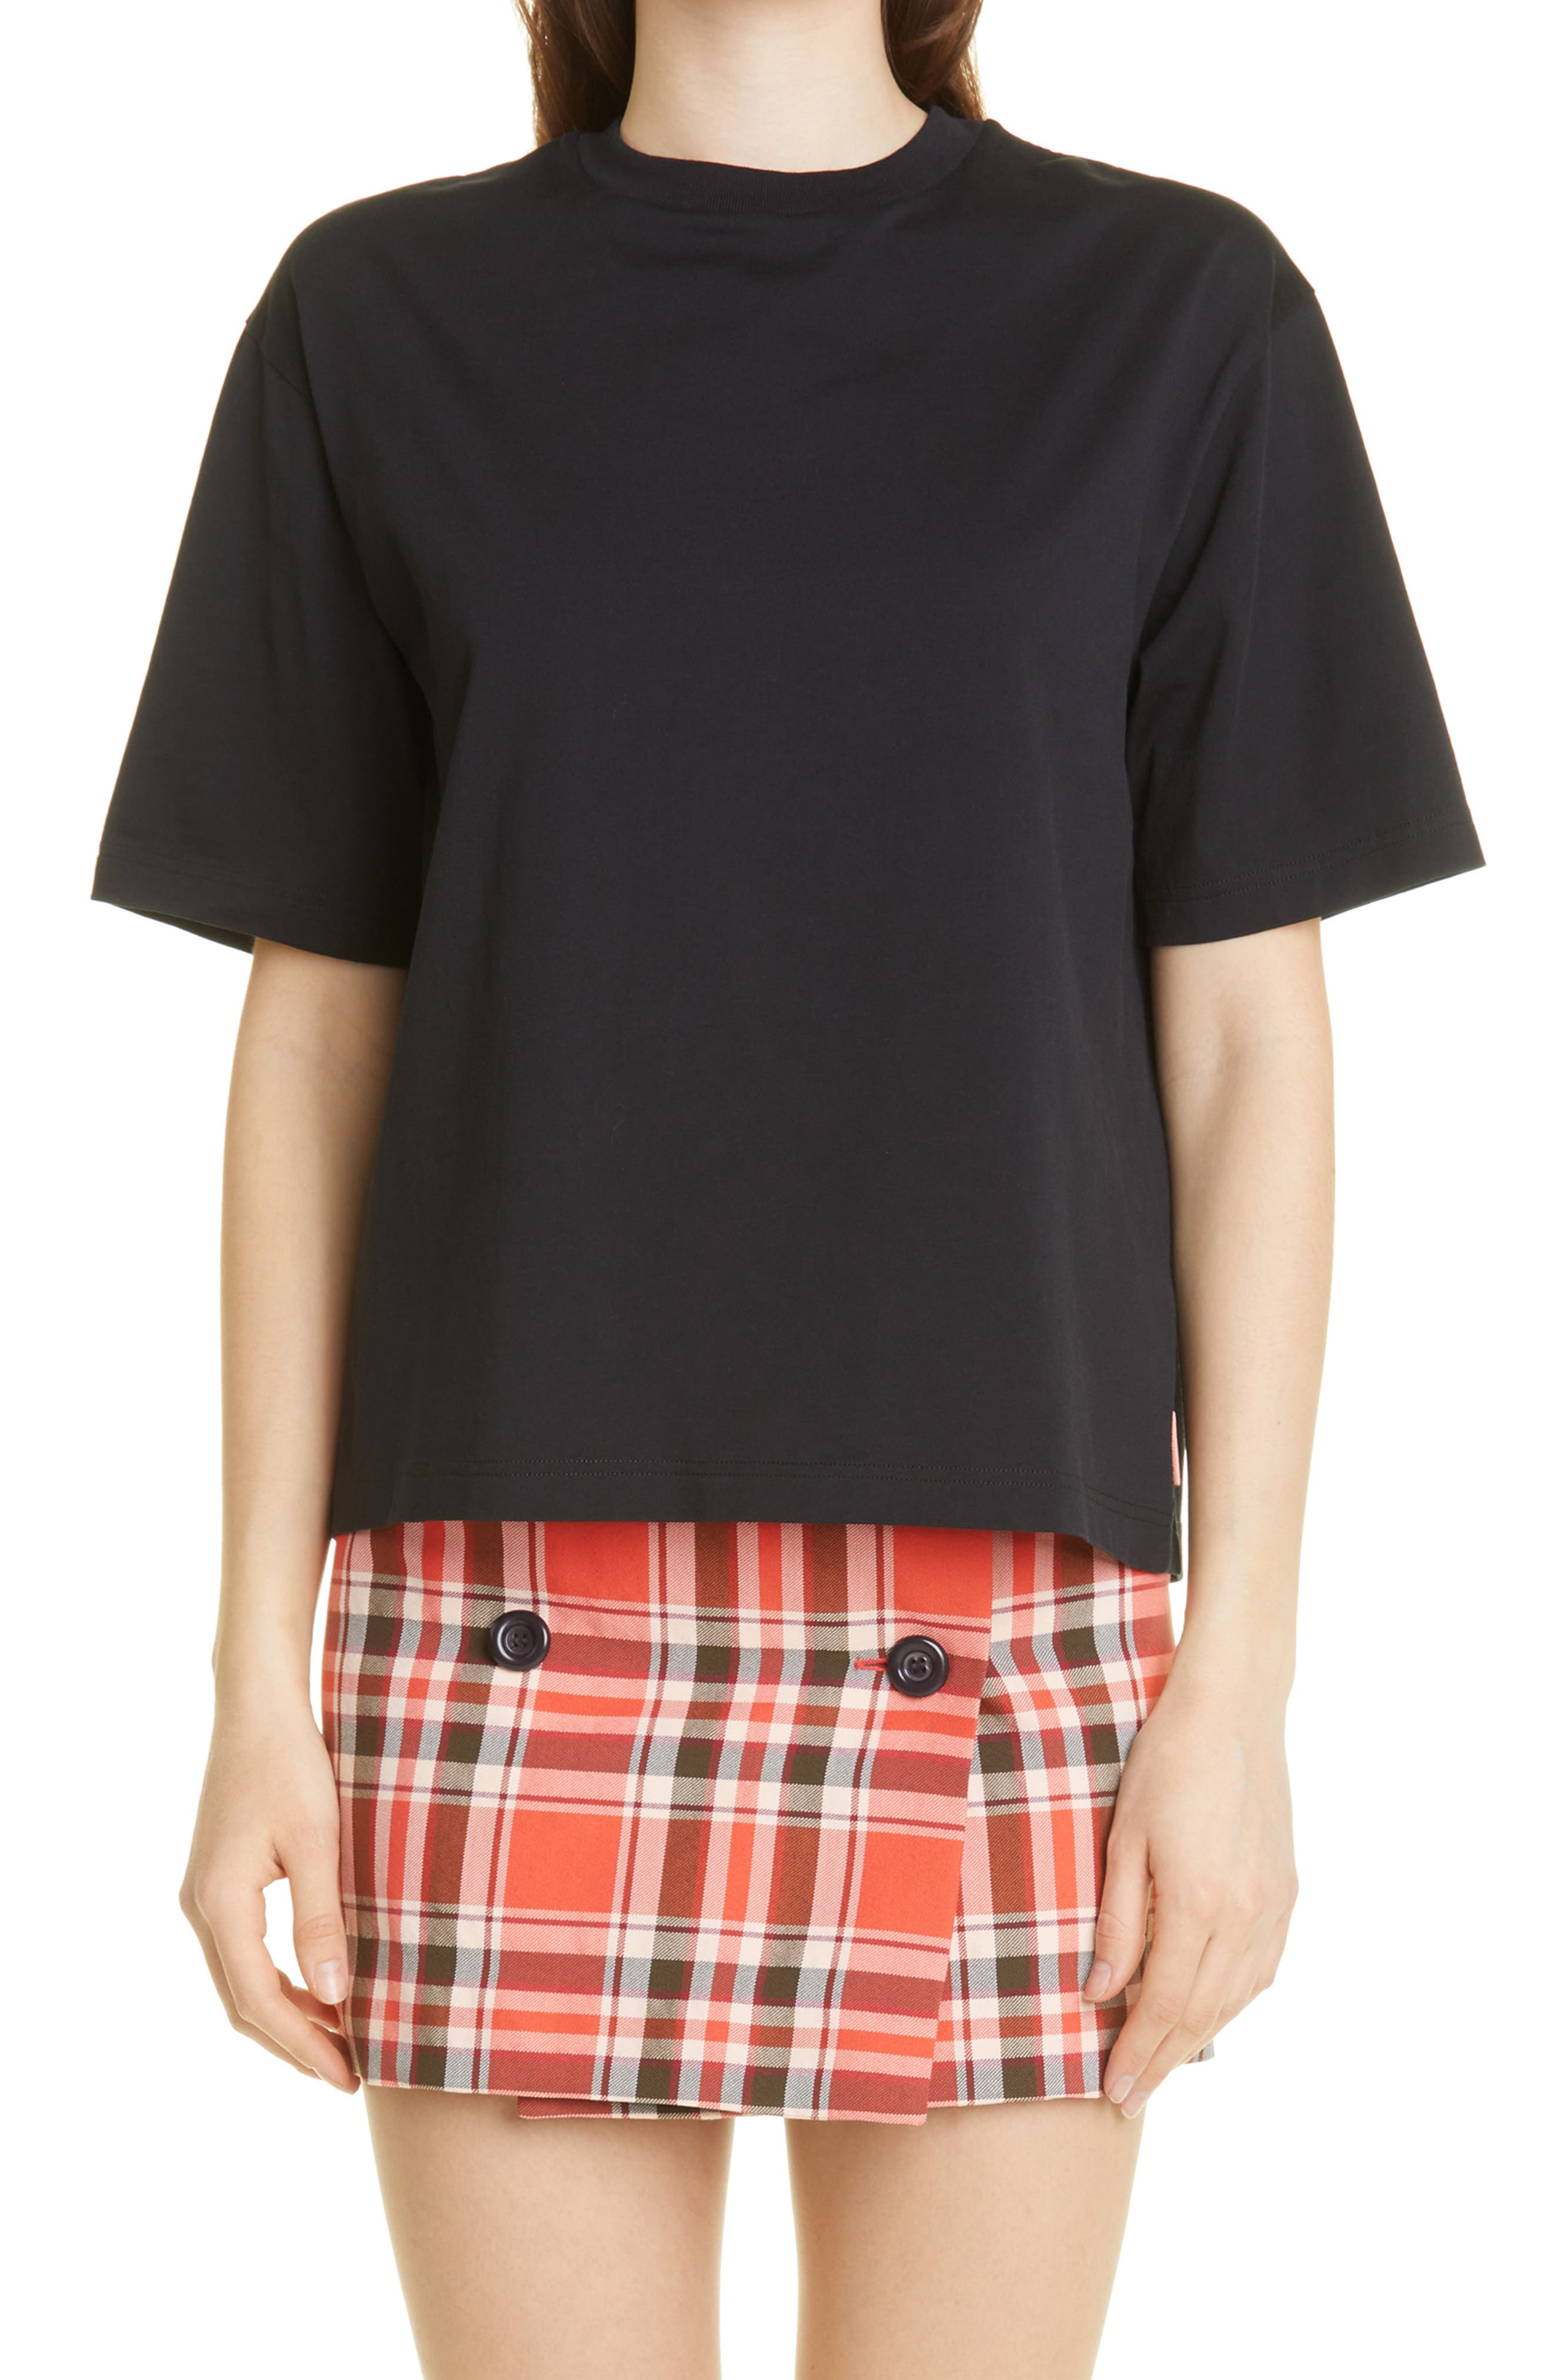 Acne Studios Women's Edie Pink Label Boxy Organic Cotton T-Shirt in Black at Nordstrom, Size Small